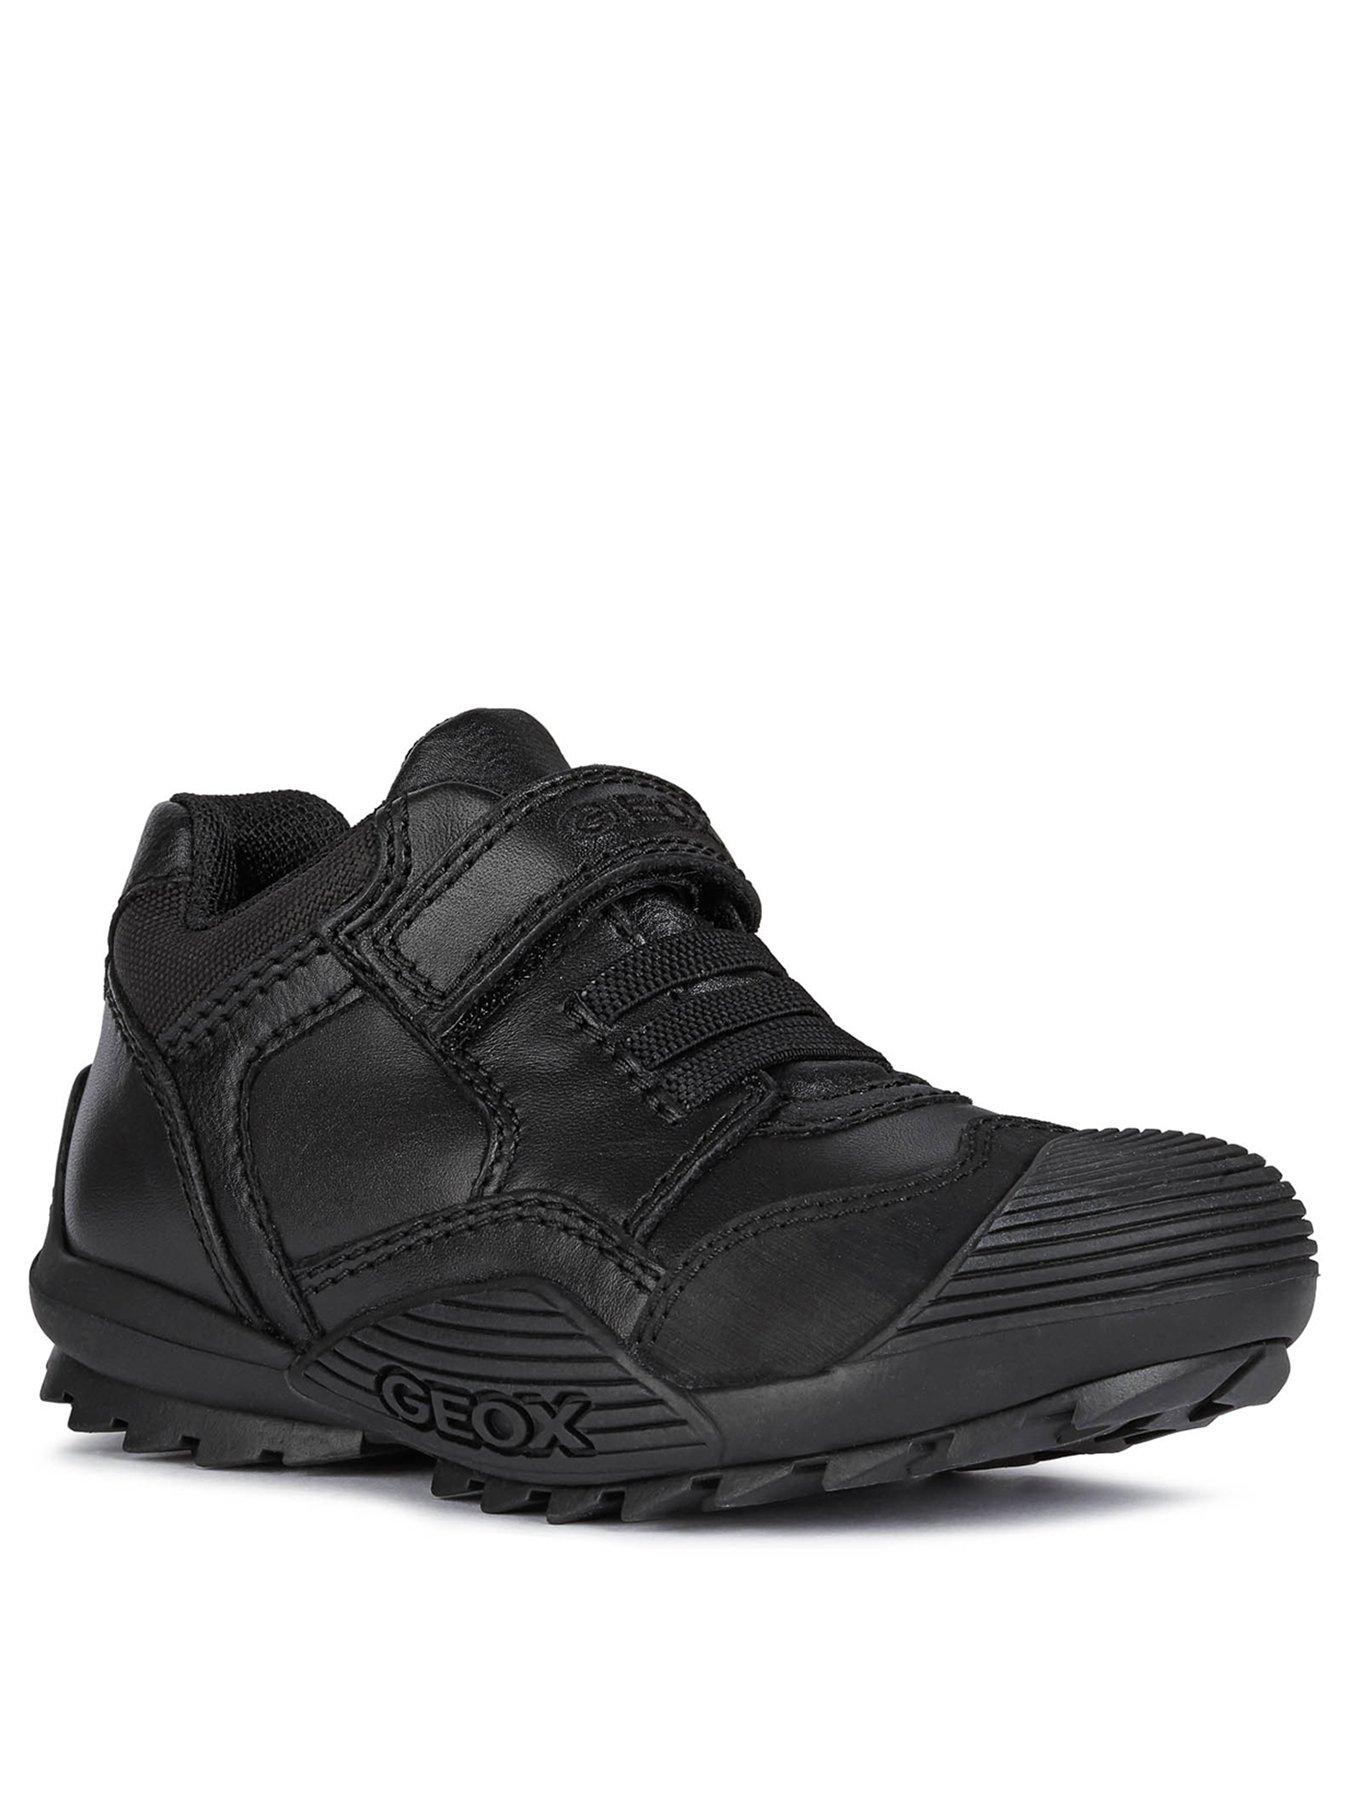 Kids Boys Savage Leather Strap and Lace School Shoe - Black